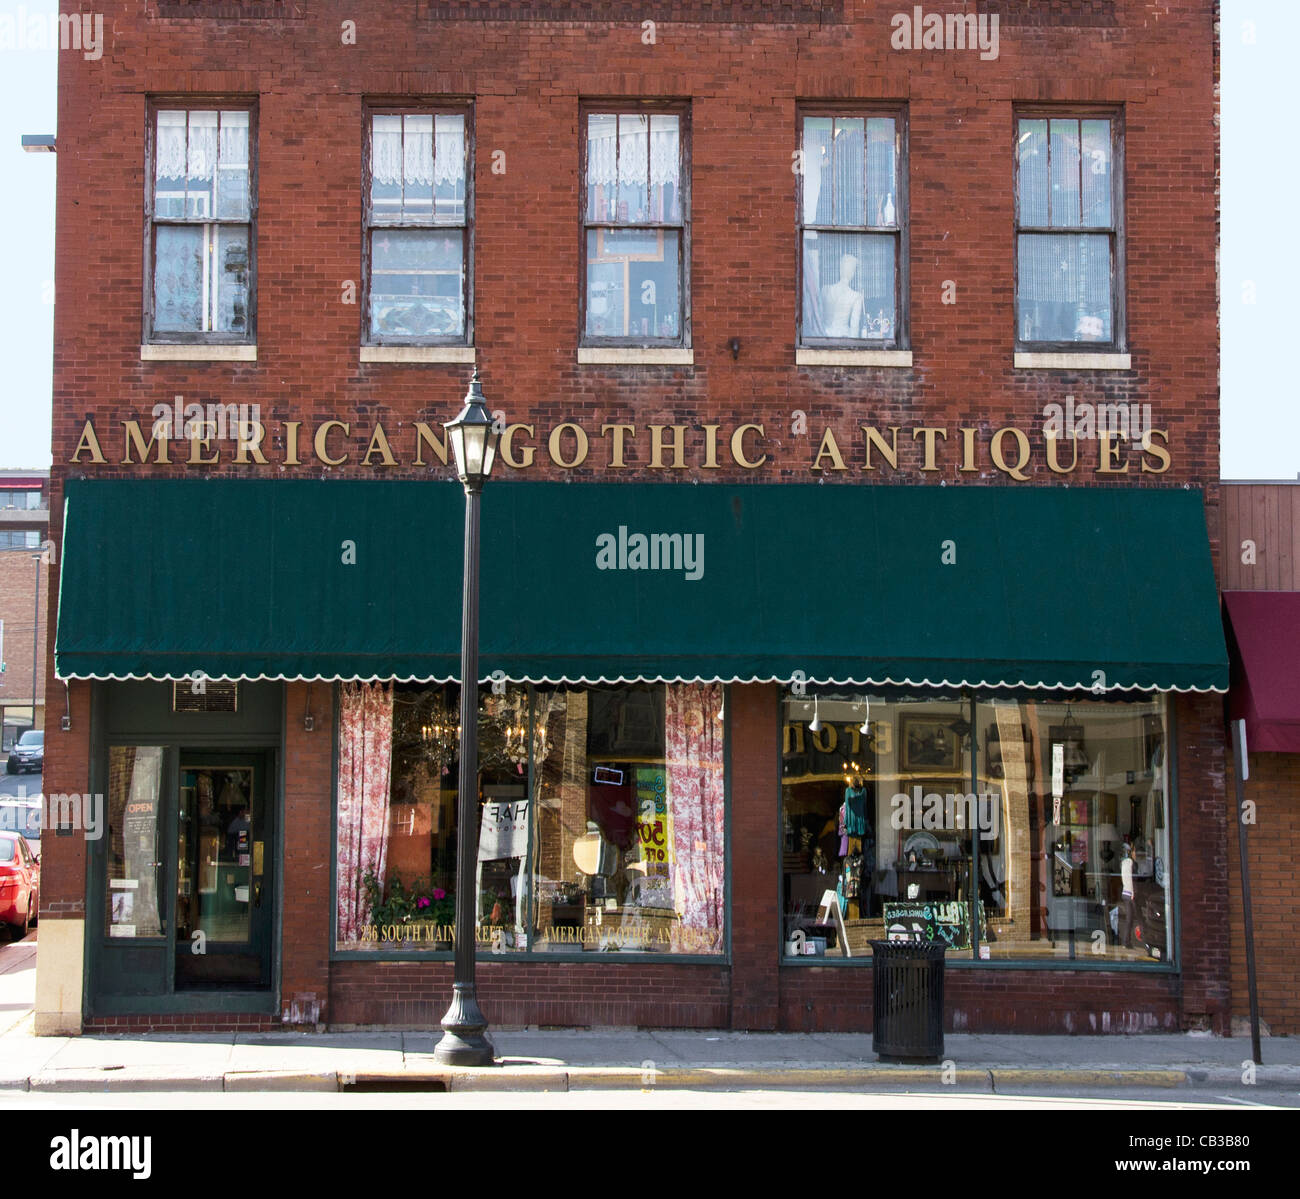 American Gothic Antiques in Stillwater, Minnesota, a town known for its bookstores, art galleries and antique stores. Stock Photo